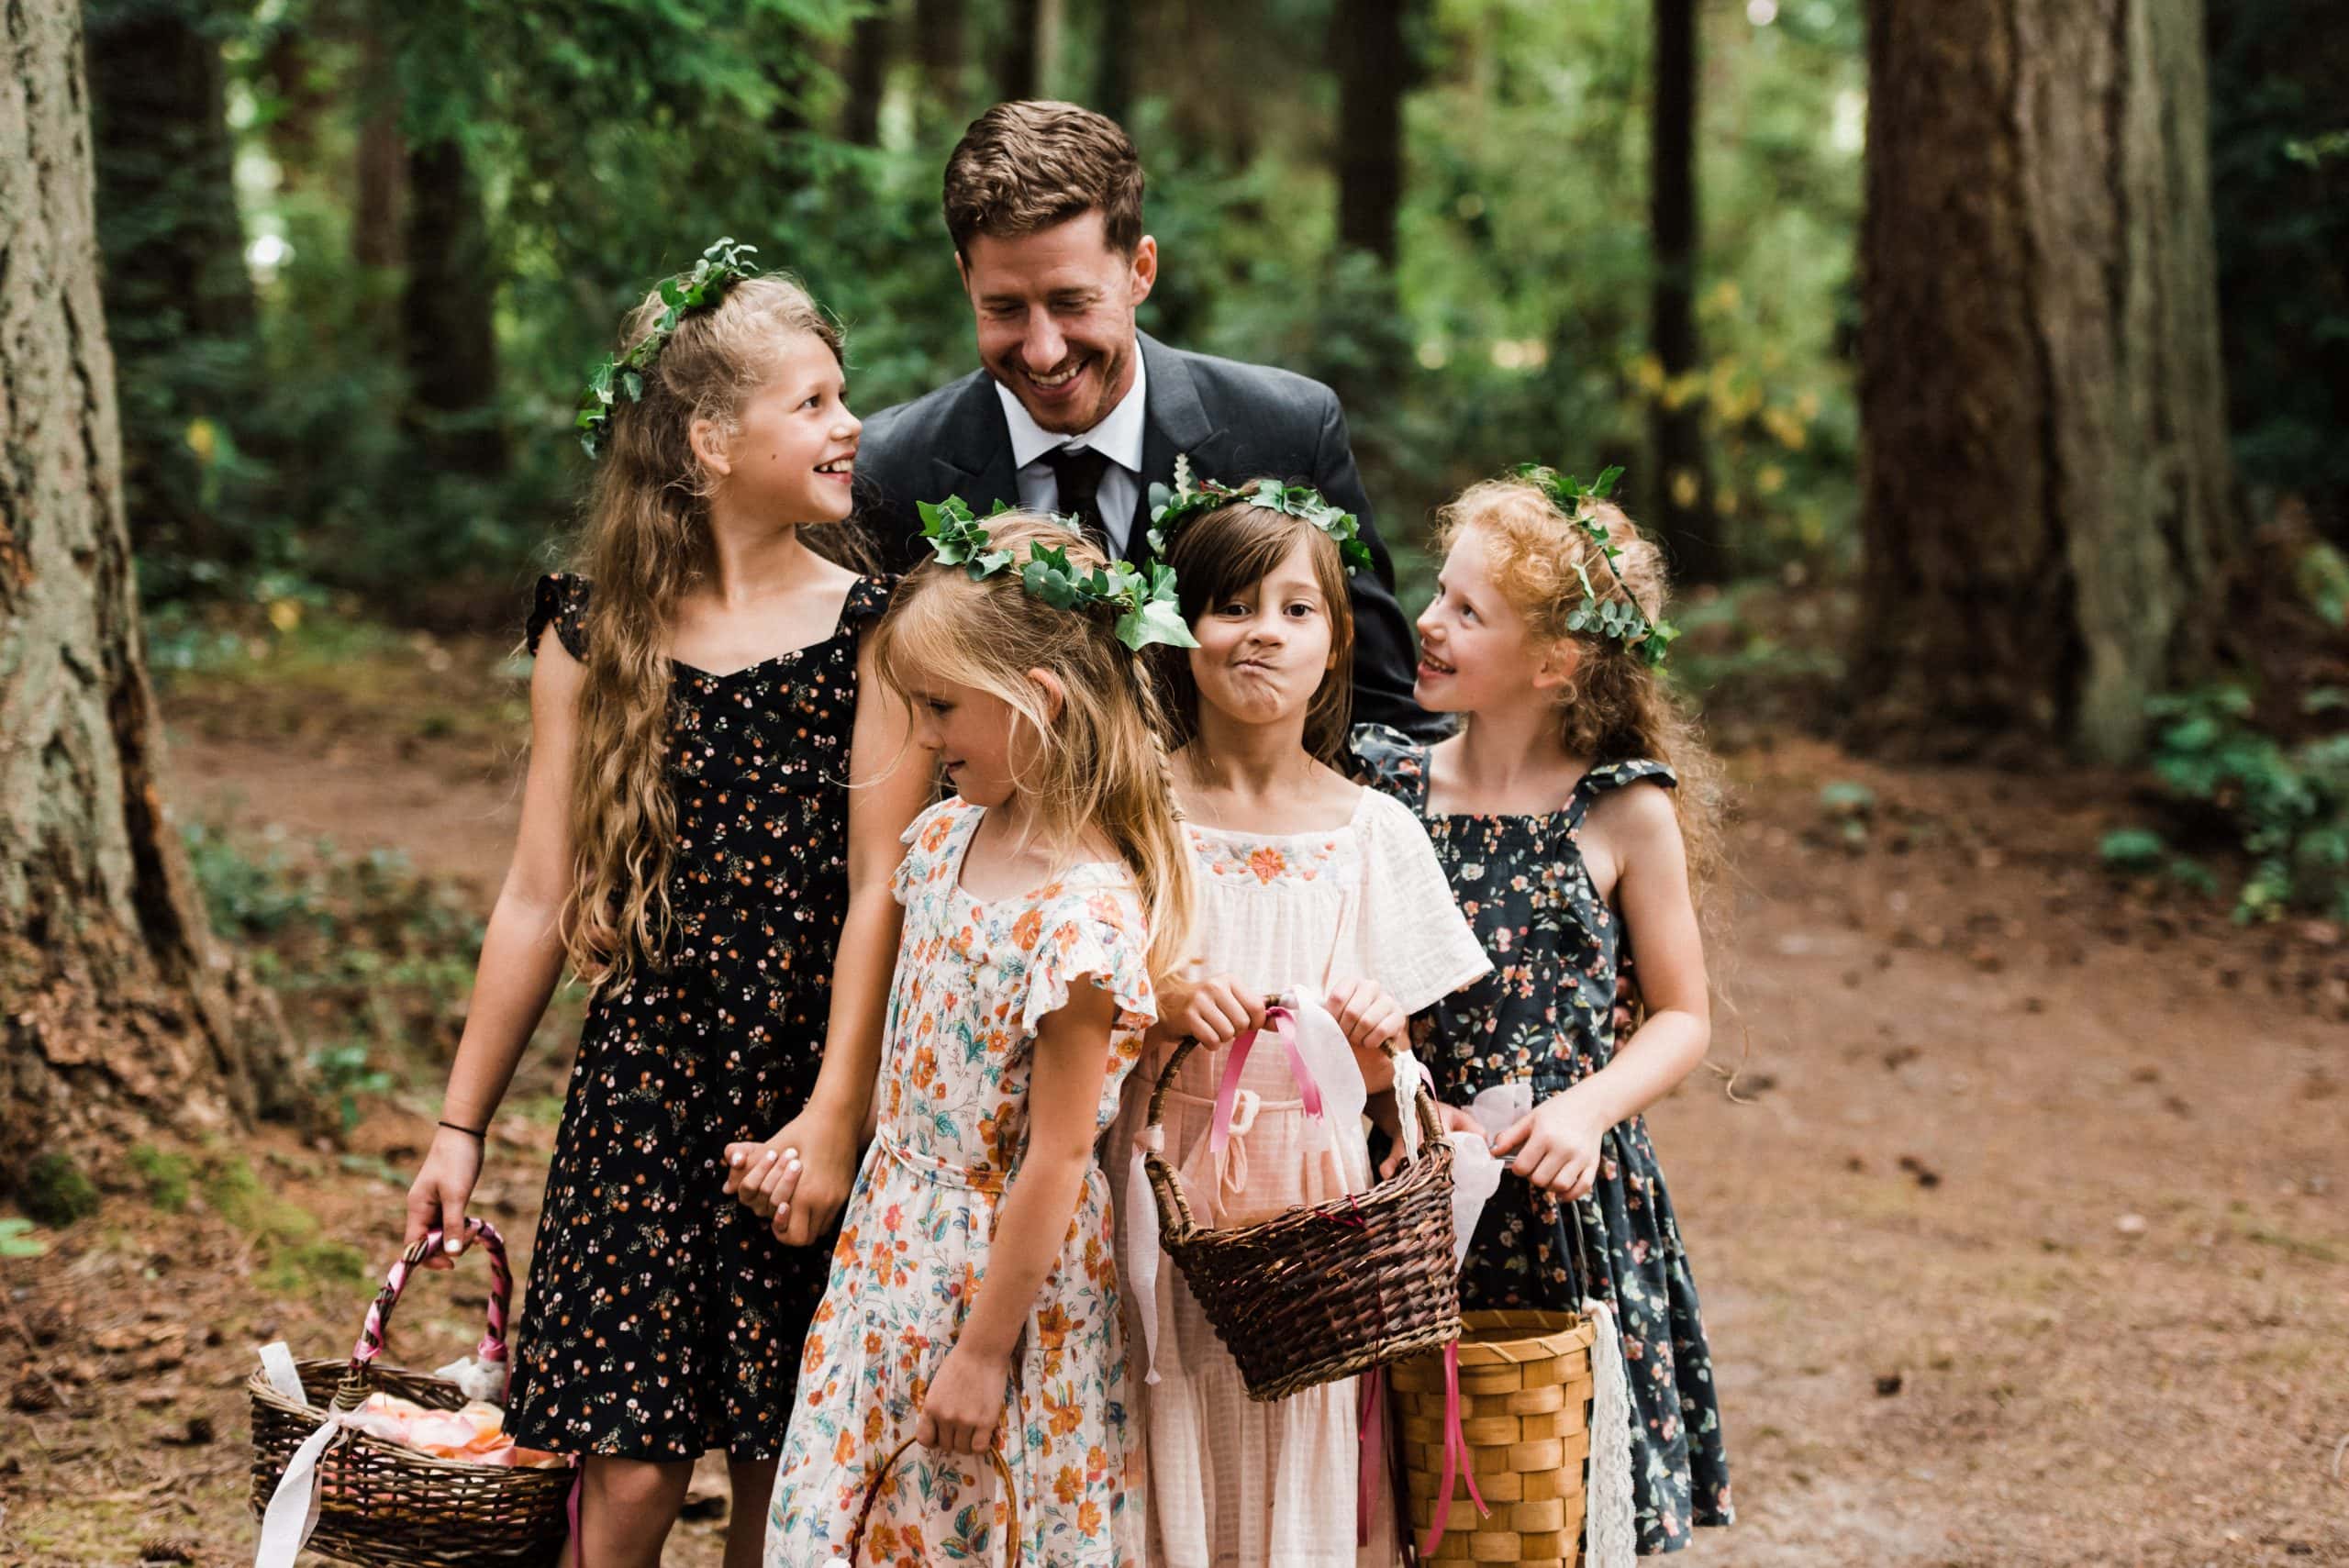 Flower girls with the groom at an intimate wedding in the Pacific Northwest.